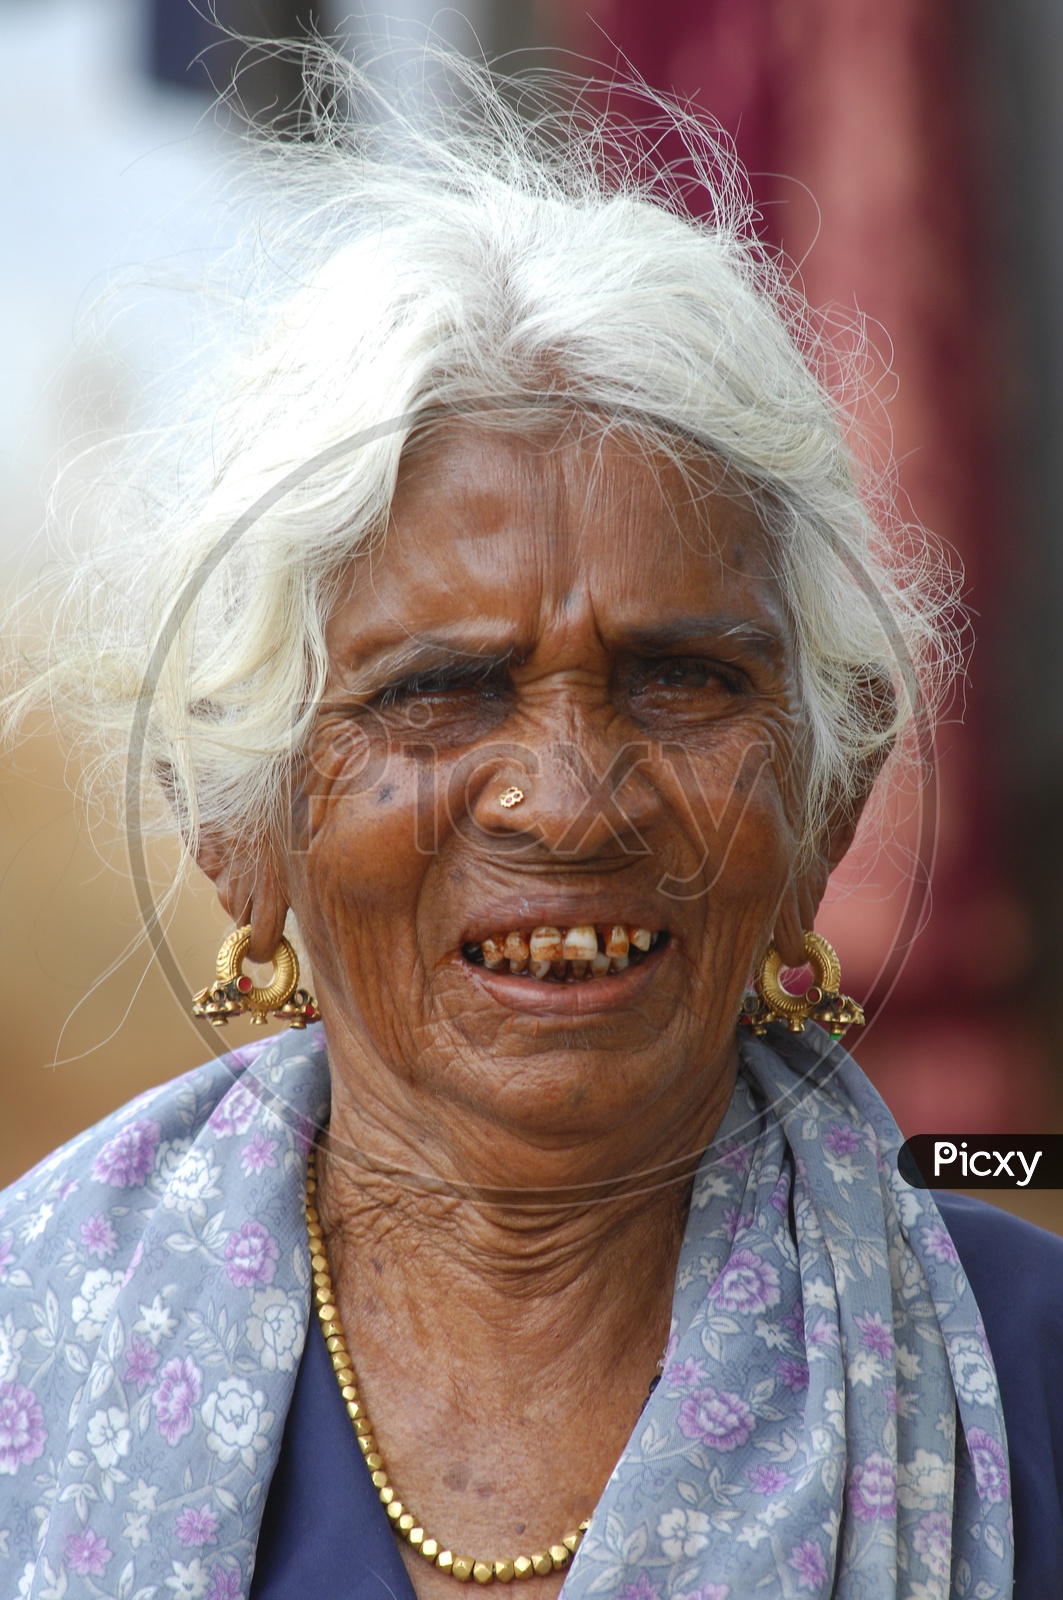 Photograph of an Old women / People face